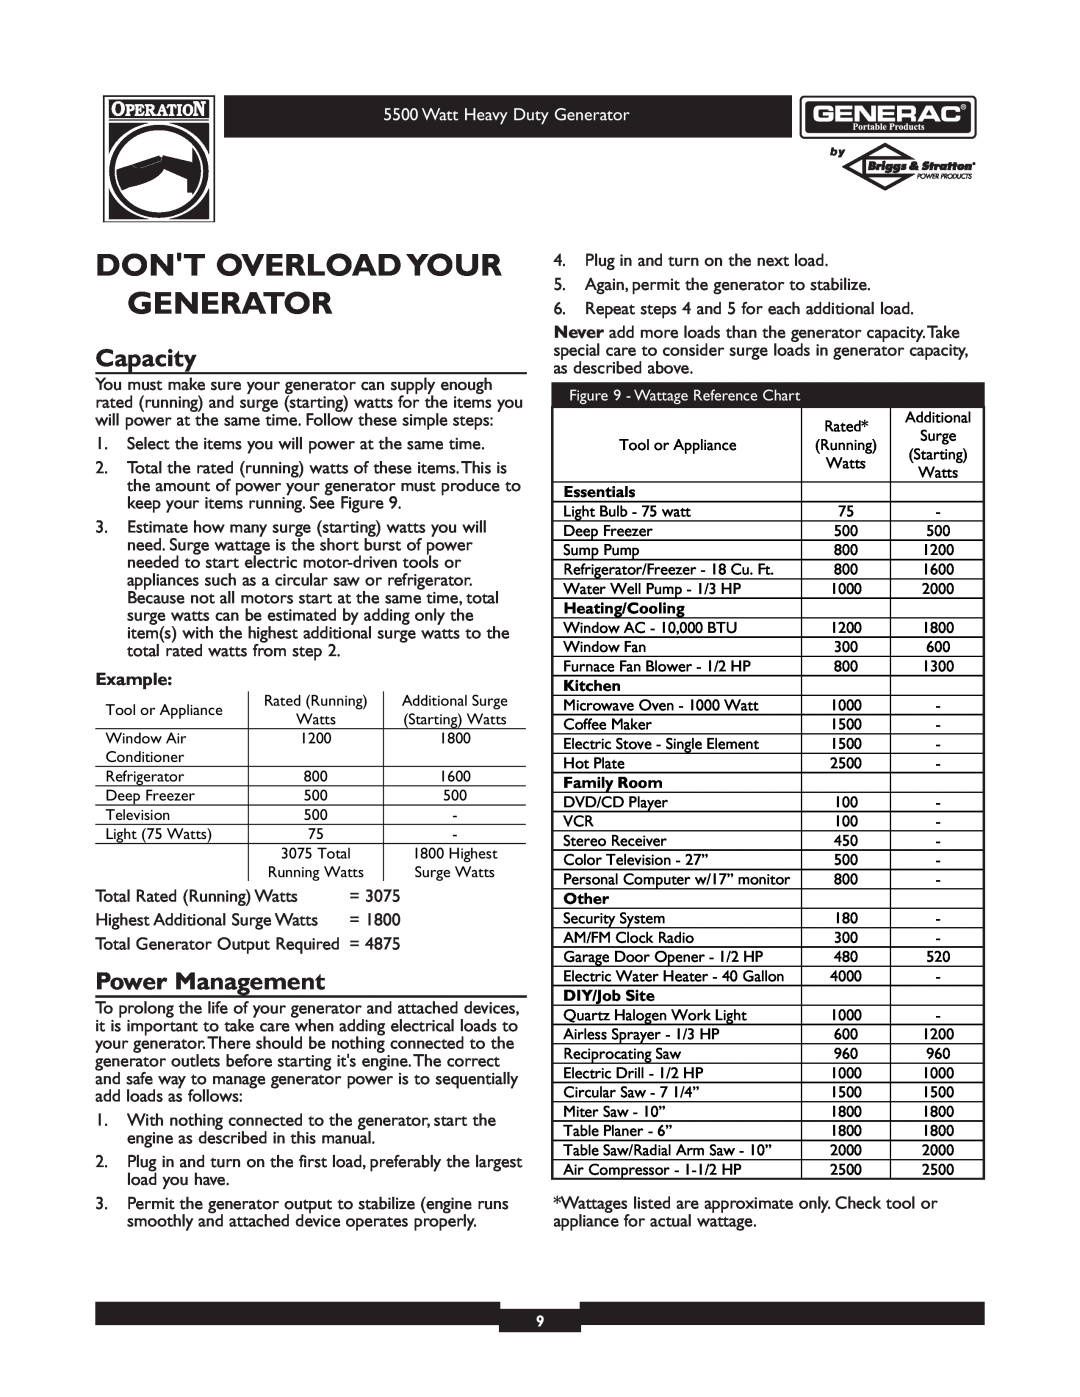 Generac 1654-0 owner manual Dont Overload Your Generator, Capacity, Power Management, Example 